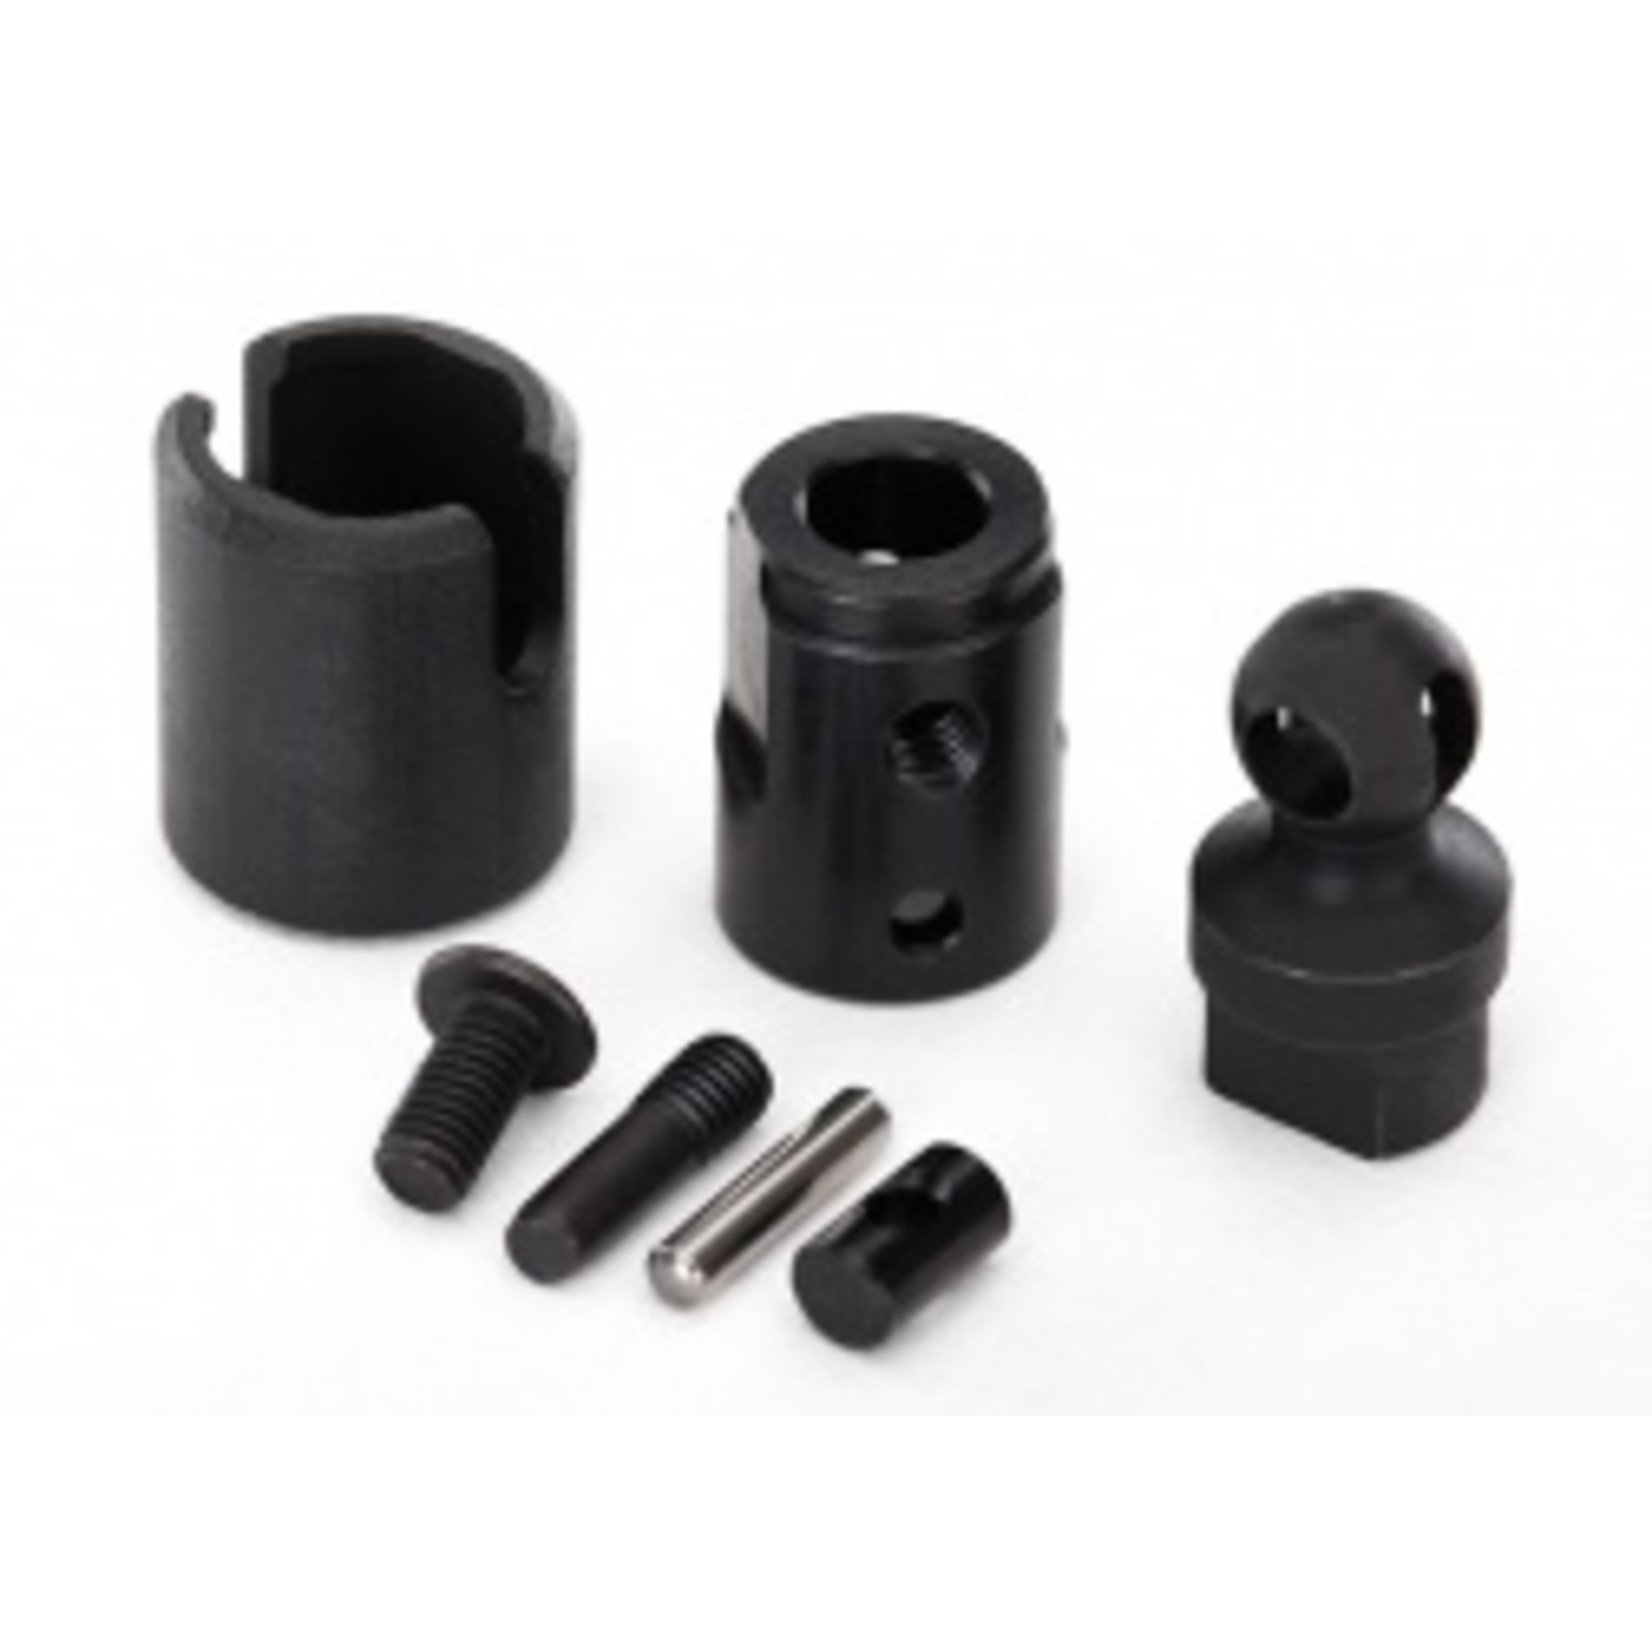 Traxxas Output drive, transmission or differential